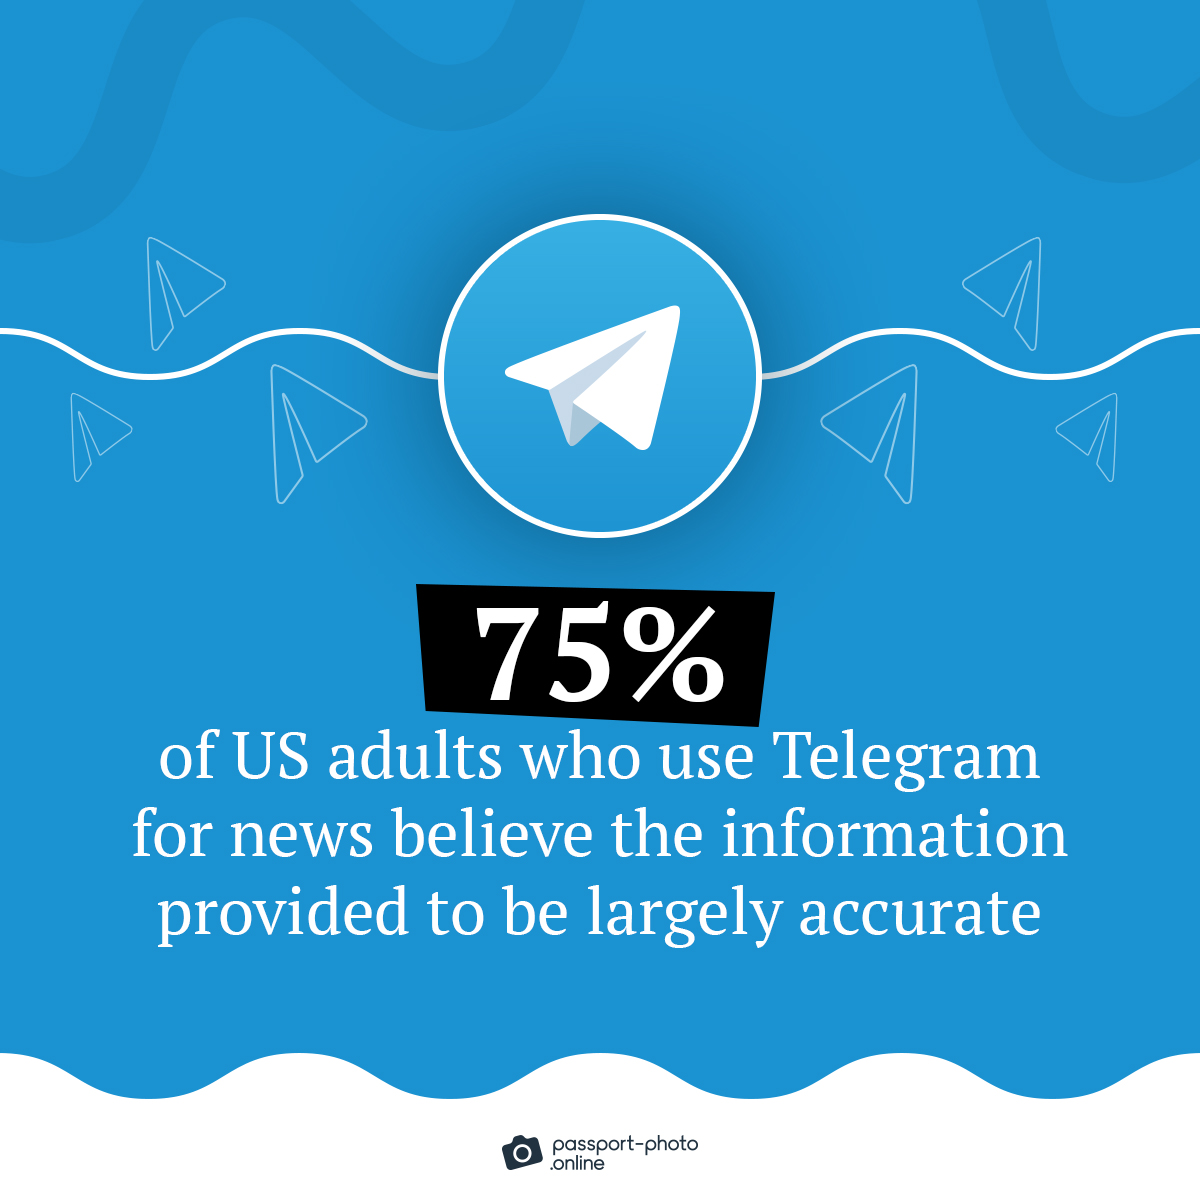 75% of US adults who use Telegram for news believe the information provided to be largely accurate